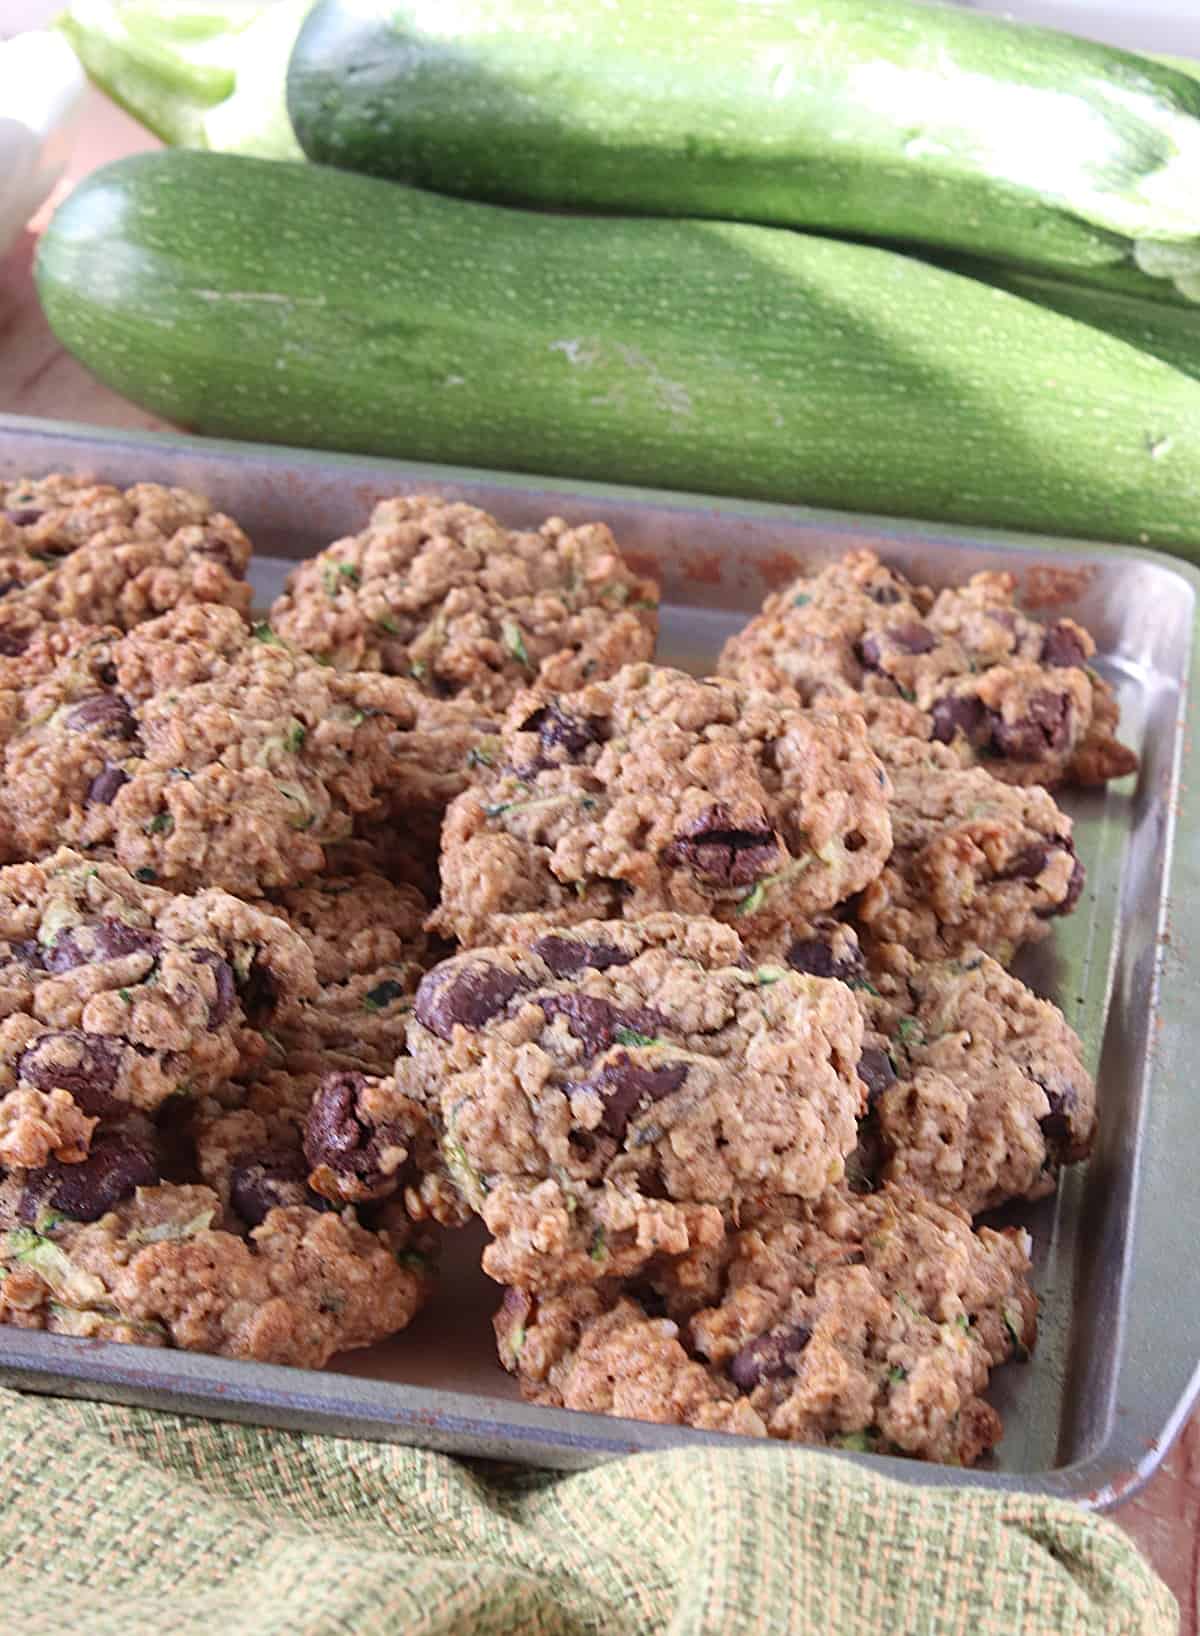 A cookie sheet filled with Zucchini Oatmeal Cookies with whole zucchini in the background.